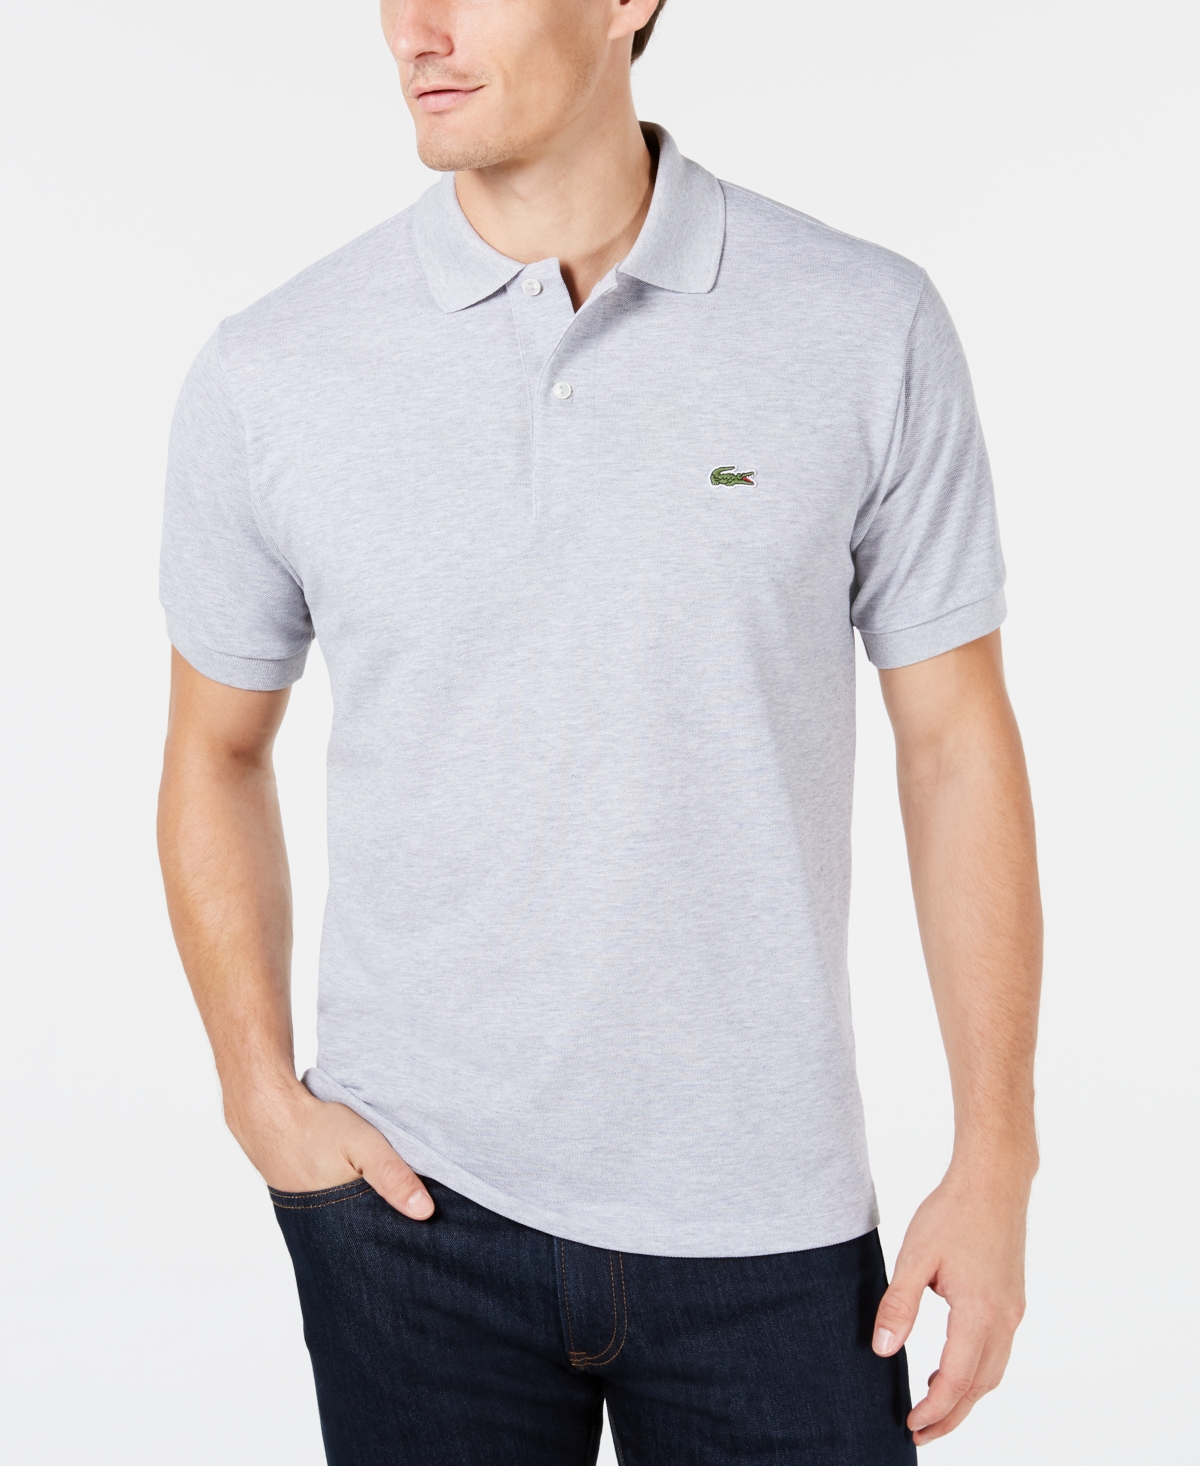 Lacoste Men's  Classic Fit L.12.12 Short Sleeve Polo In Silver Chine Grey